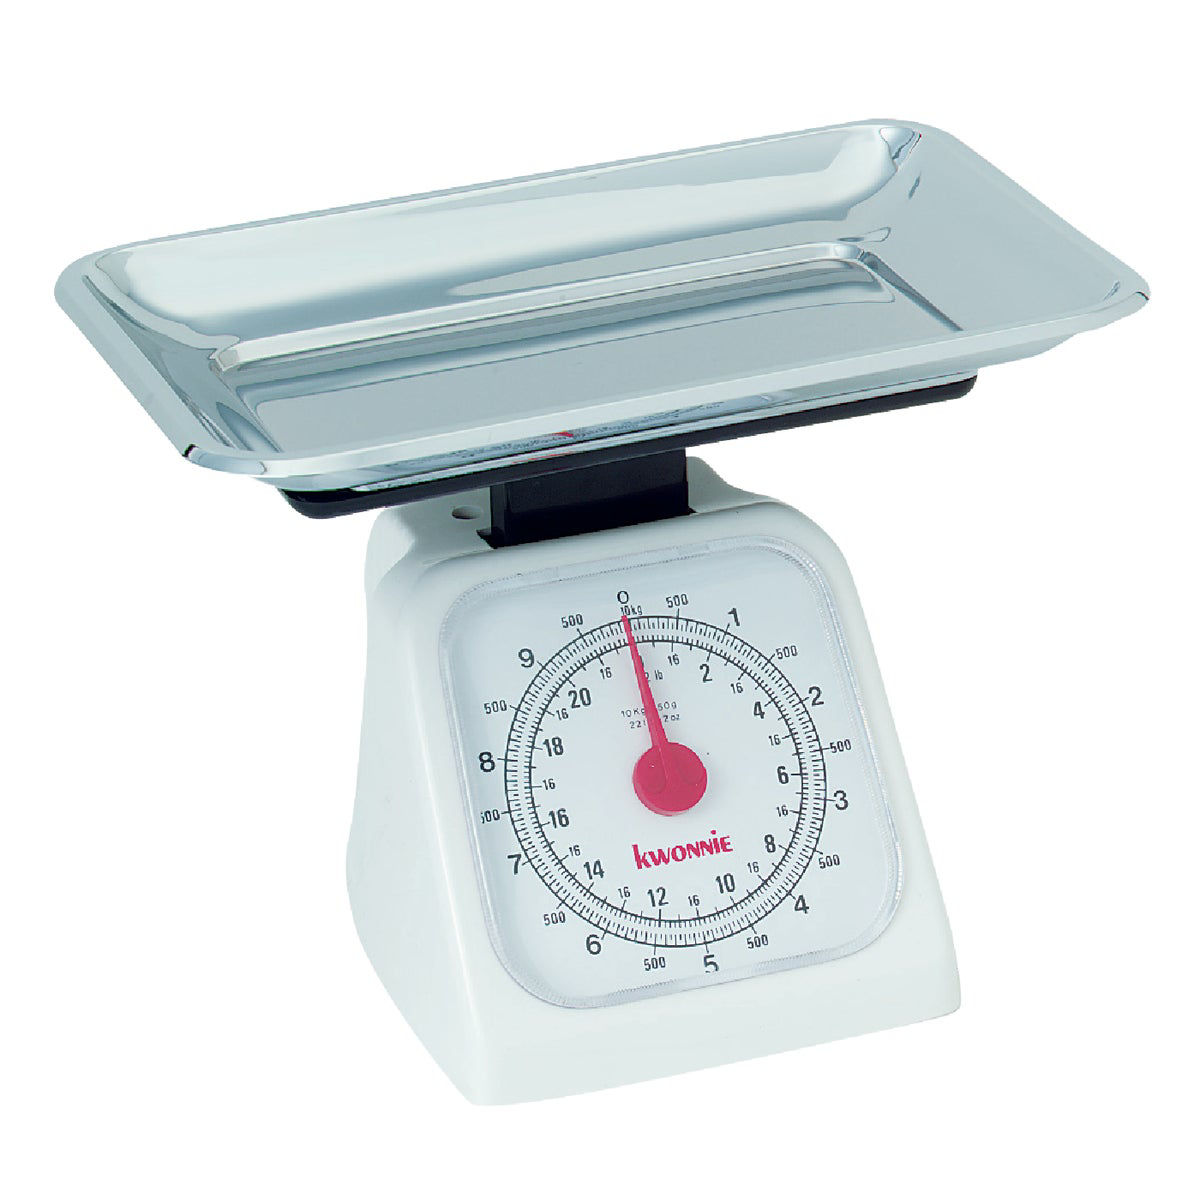 Norpro 22Lb Food Scale Removable Metal Tray, One Size, Shown